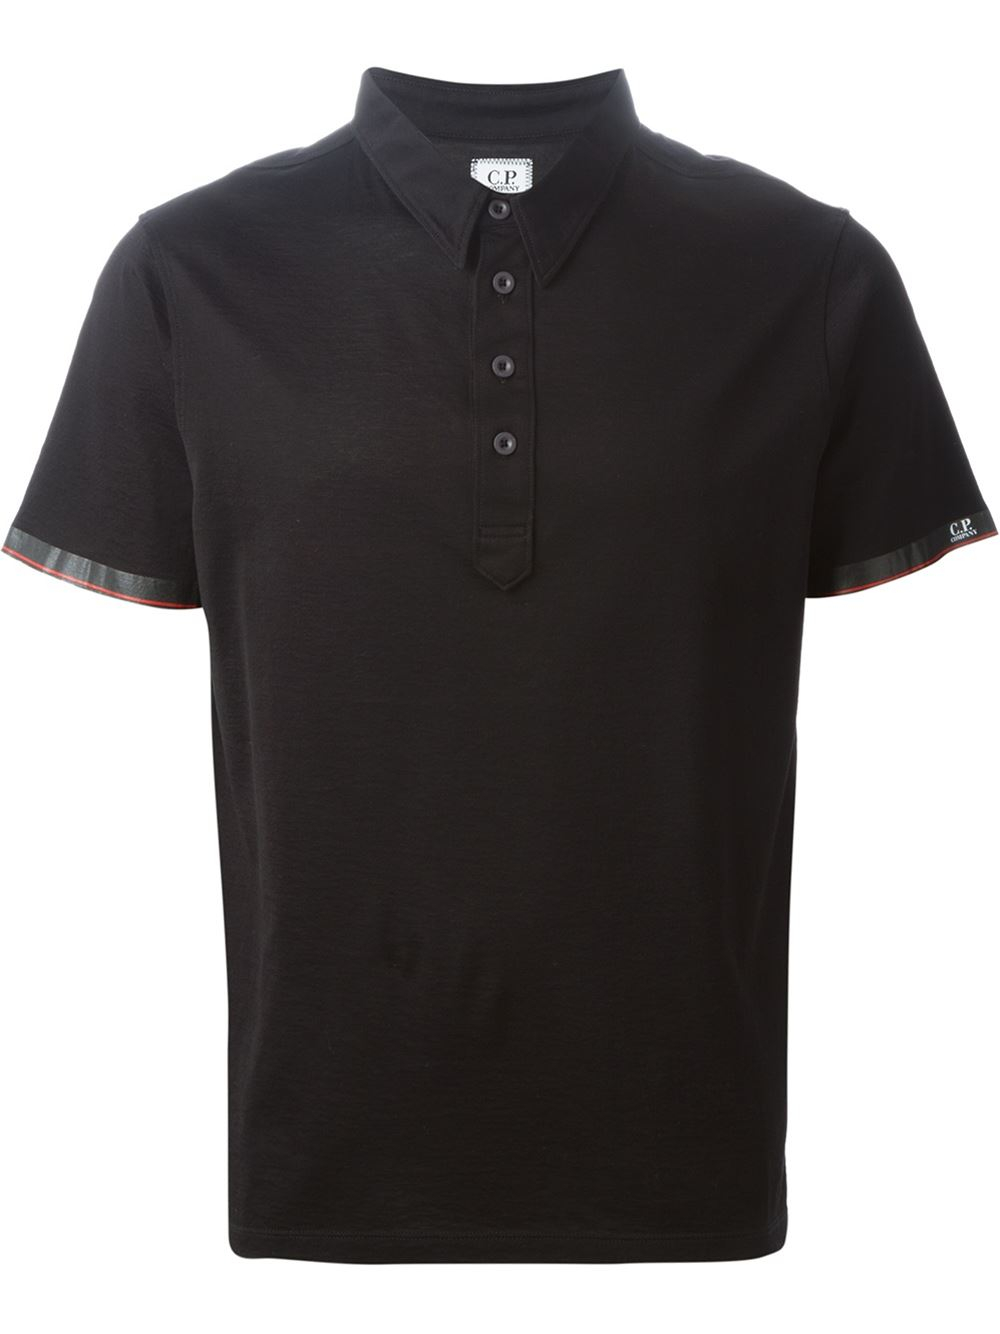 C P Company Short Sleeved Polo Shirt in Black for Men | Lyst